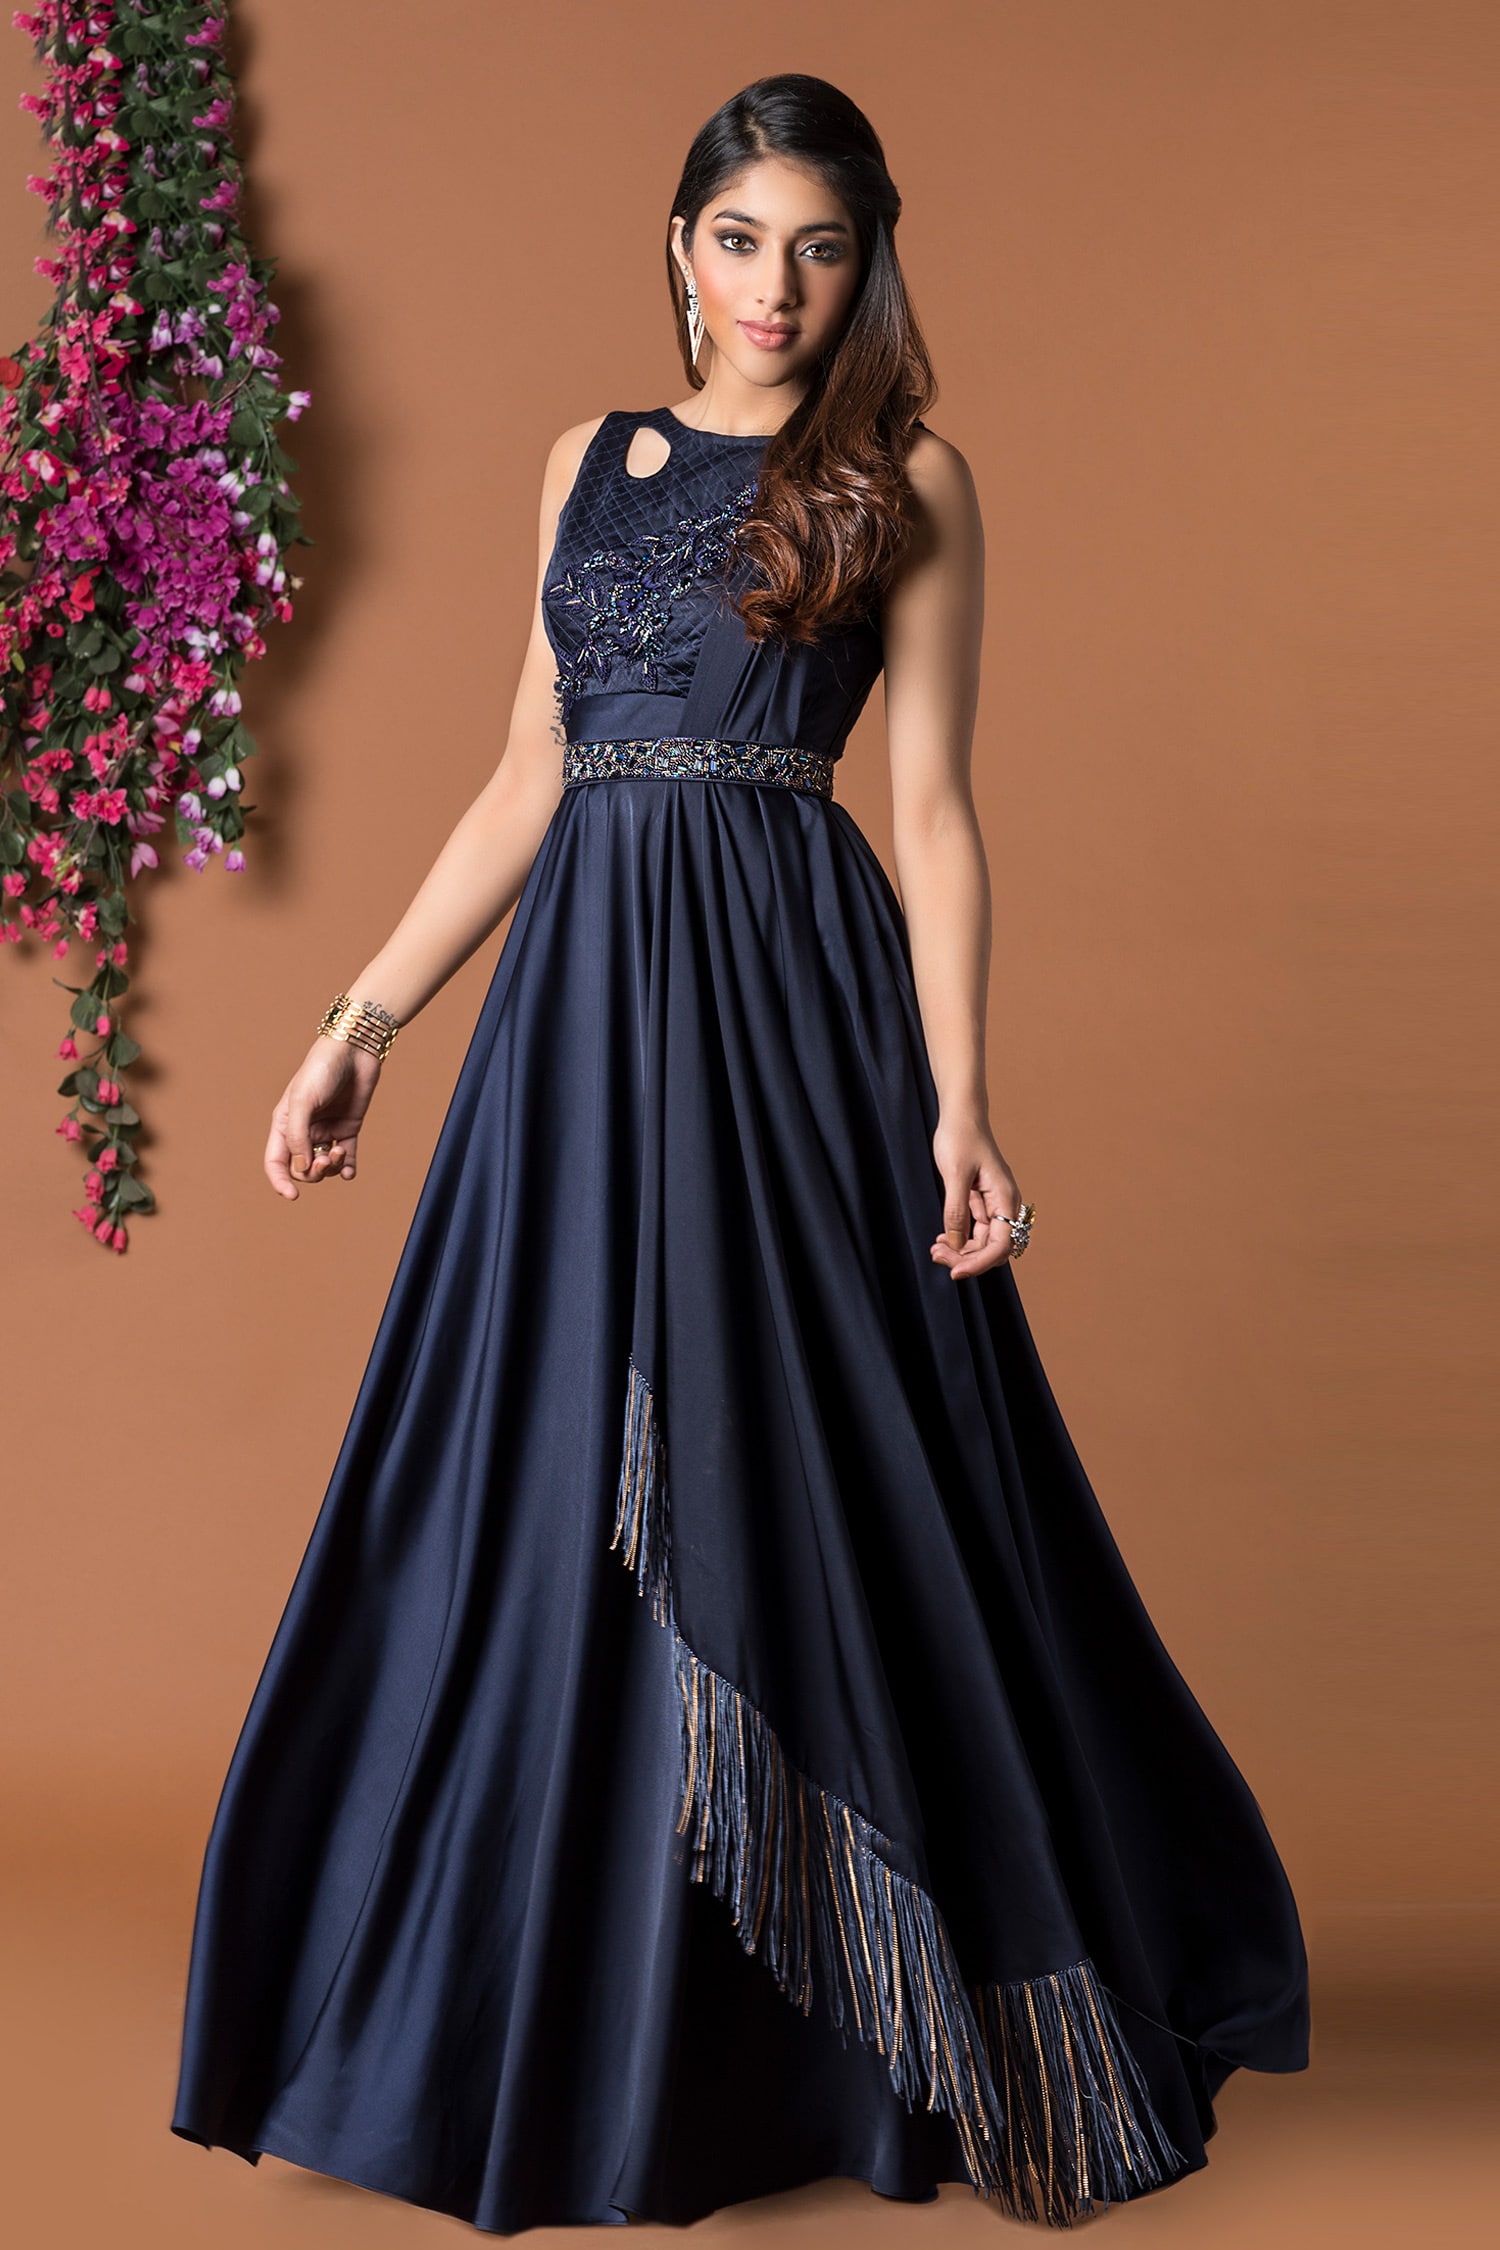 Evening gown Stock Photos, Royalty Free Evening gown Images | Depositphotos